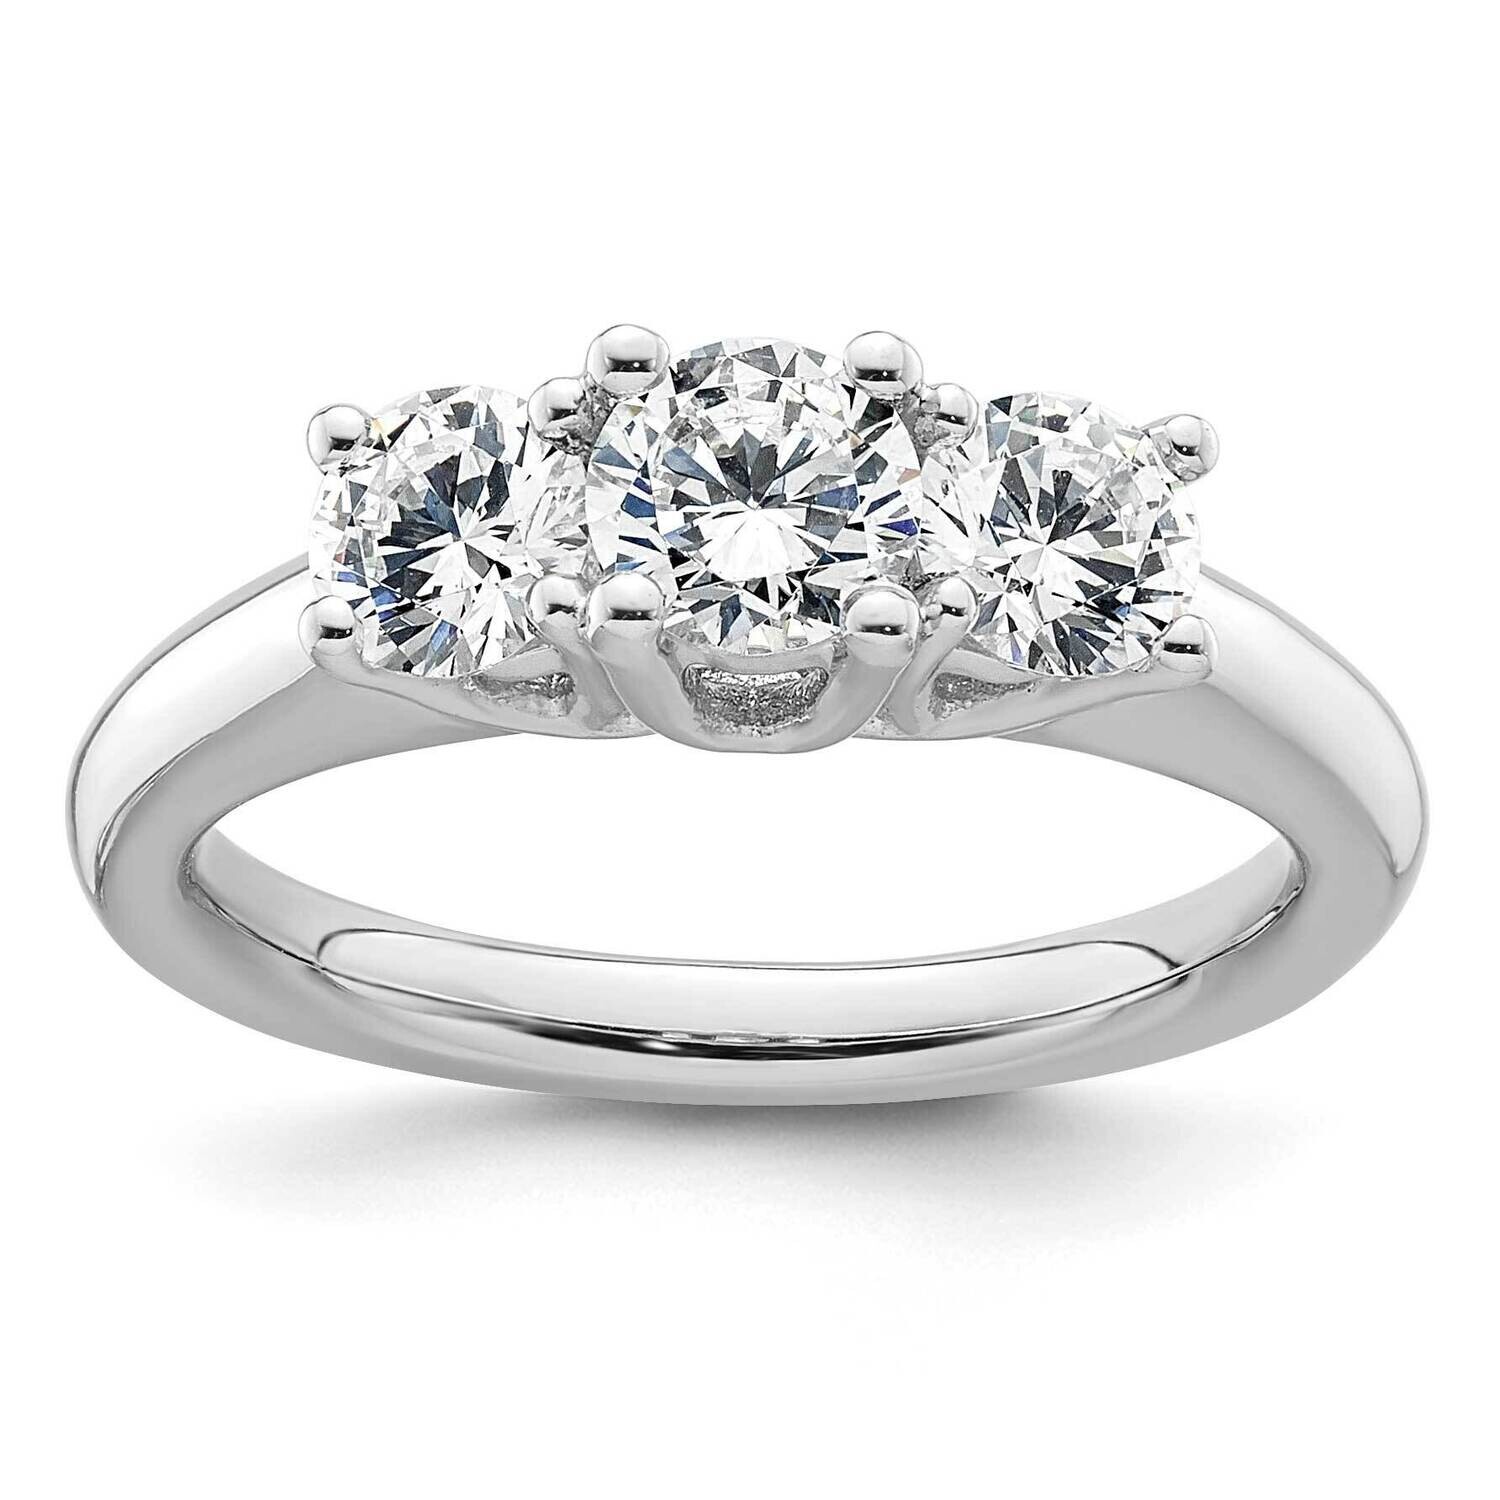 3-Stone Holds 1/2 Carat 5.2mm Round Center 2-4.1mm Round Sides Engagement Ring Mounting 14k White Gold RM2946E-050-CWAA